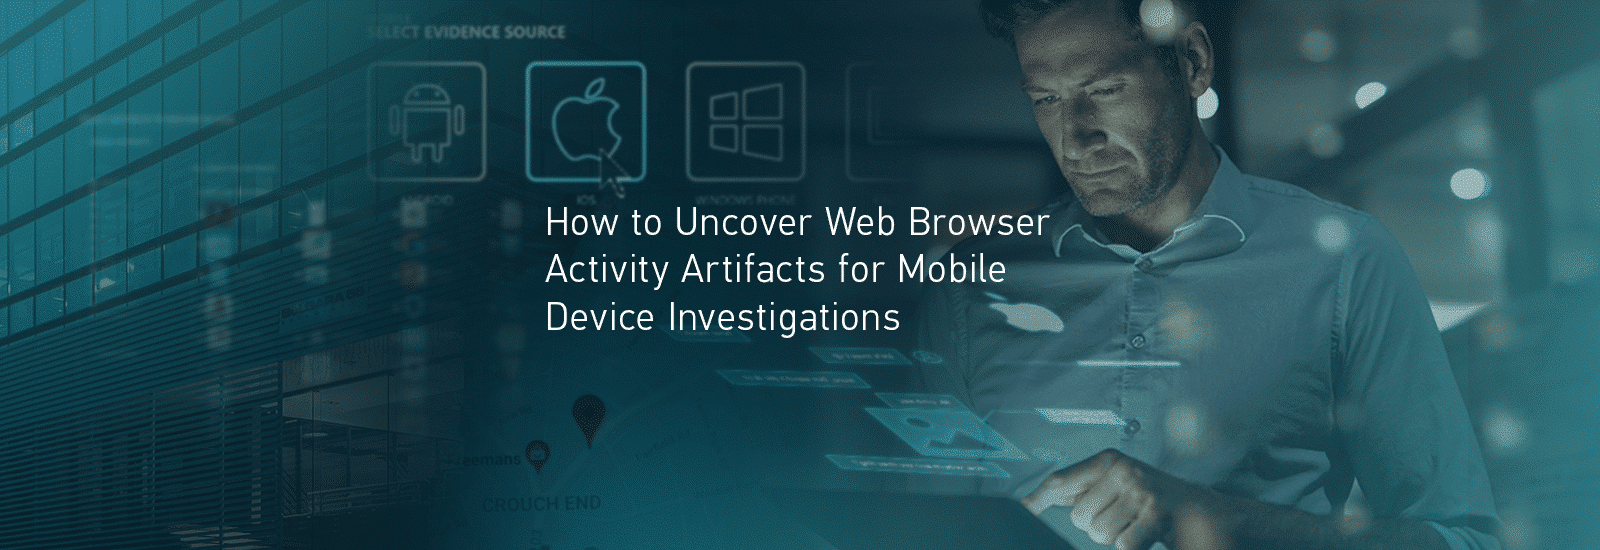 A decorative header for the post "How to Uncover Web Browser Activity Artifacts for Mobile Device Investigations"